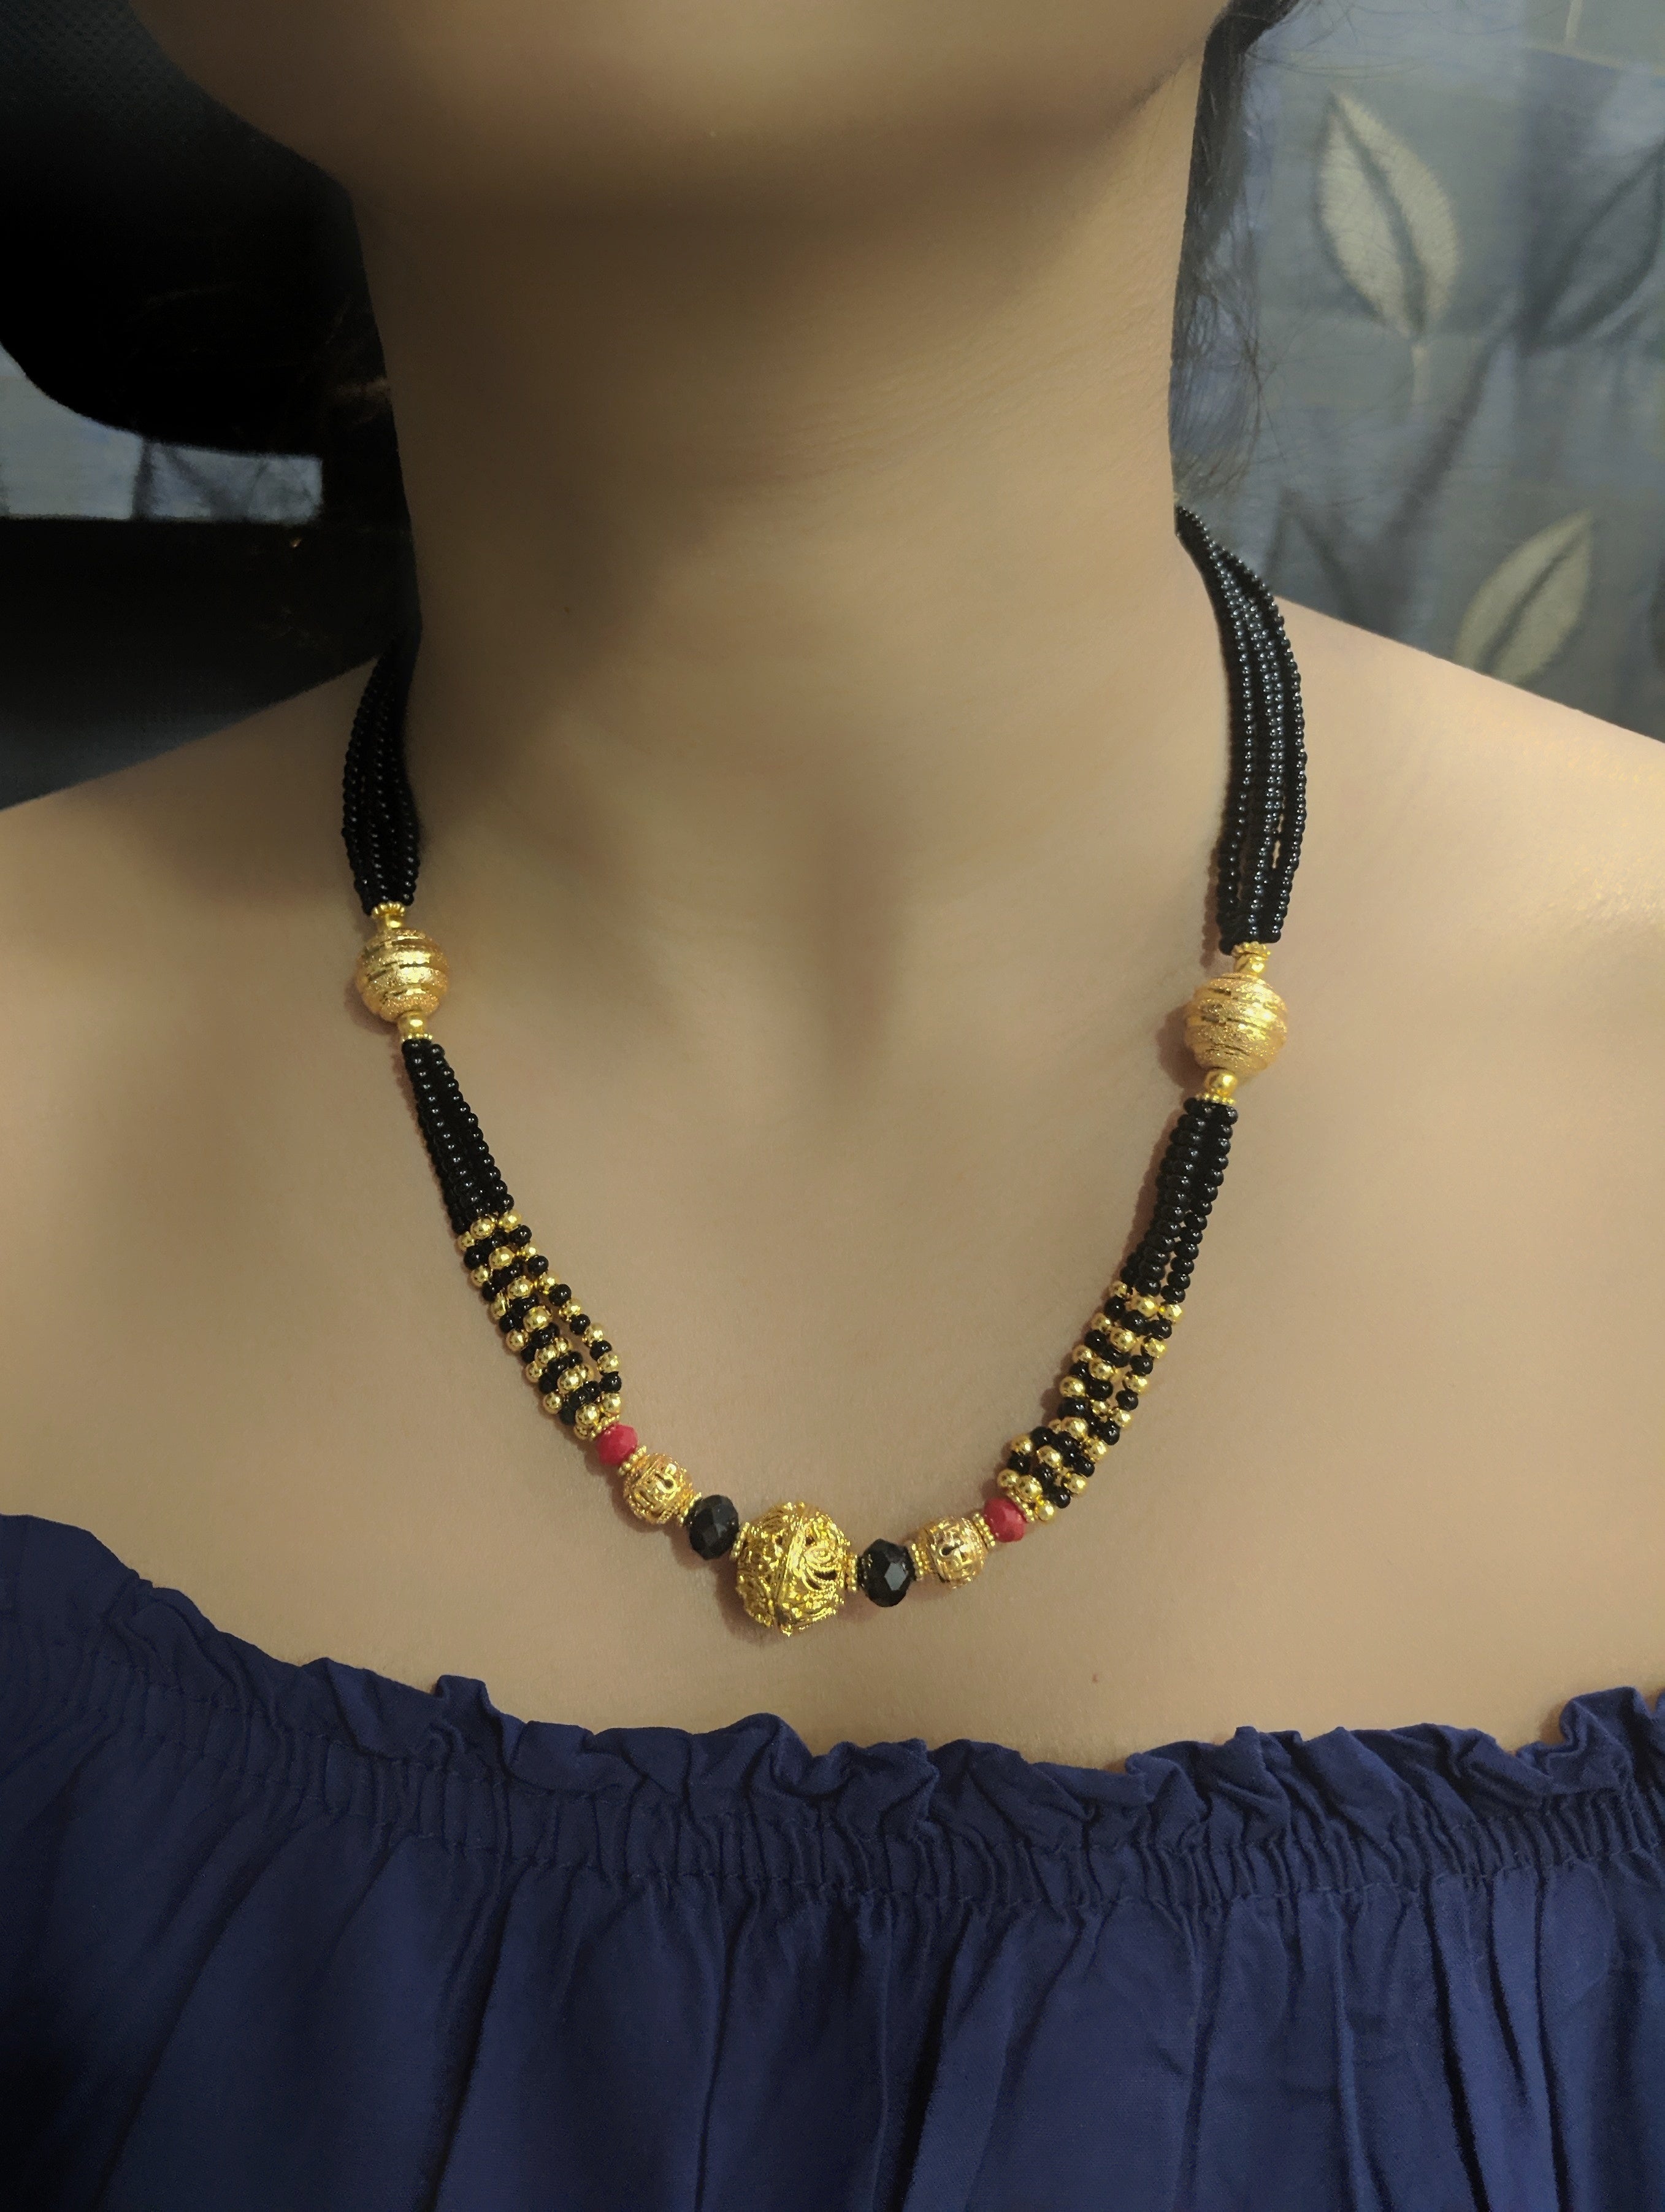 image for Maharashtrian Short Gold Mangalsutra Designs Fancy Ball Pendant Layered Gold And Black Beads Chain